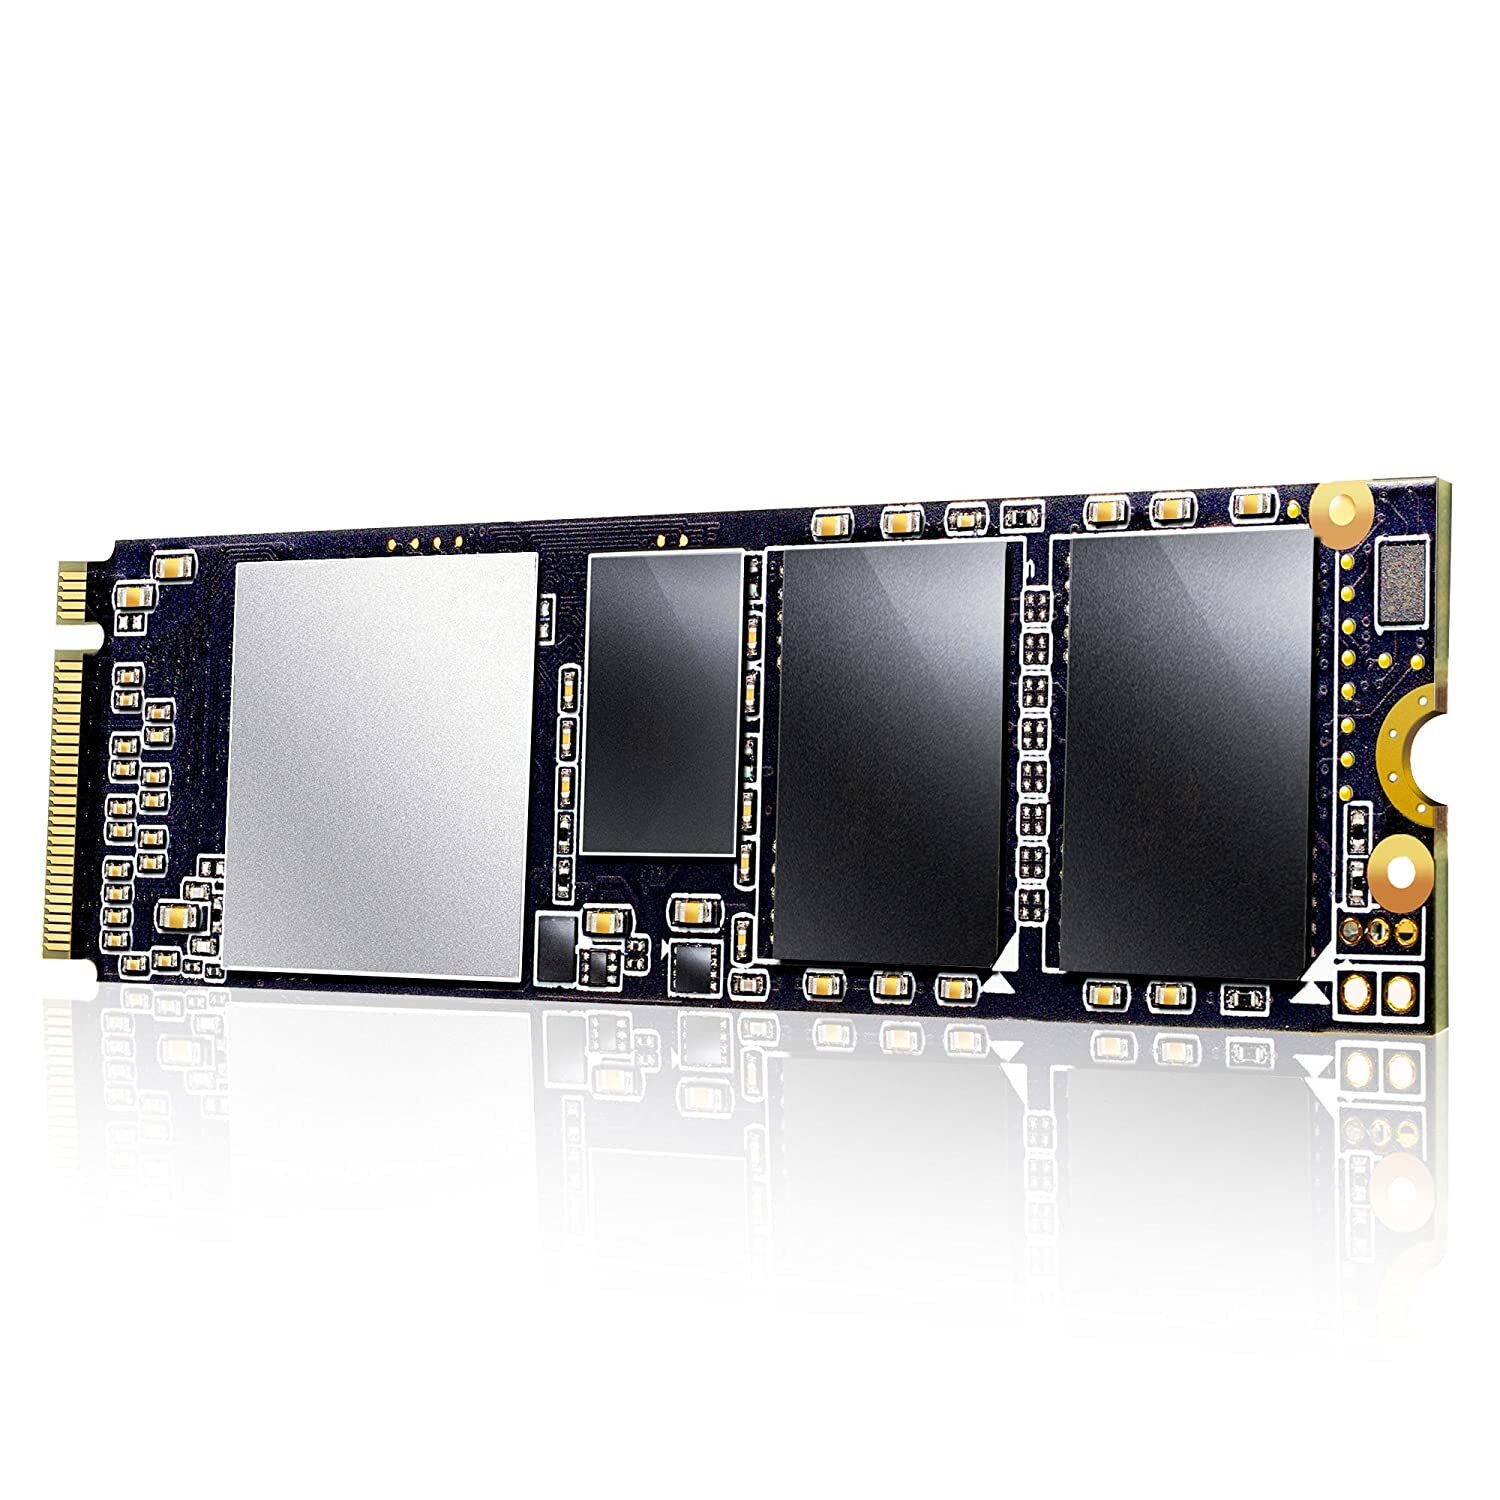 XPG SX6000 PCIe 256GB 3D NAND PCIe Gen3x2 M.2 2280 NVMe 1.2 R/W up to 1000/800MB/s Solid State Drive (ASX6000NP-256GT-C)